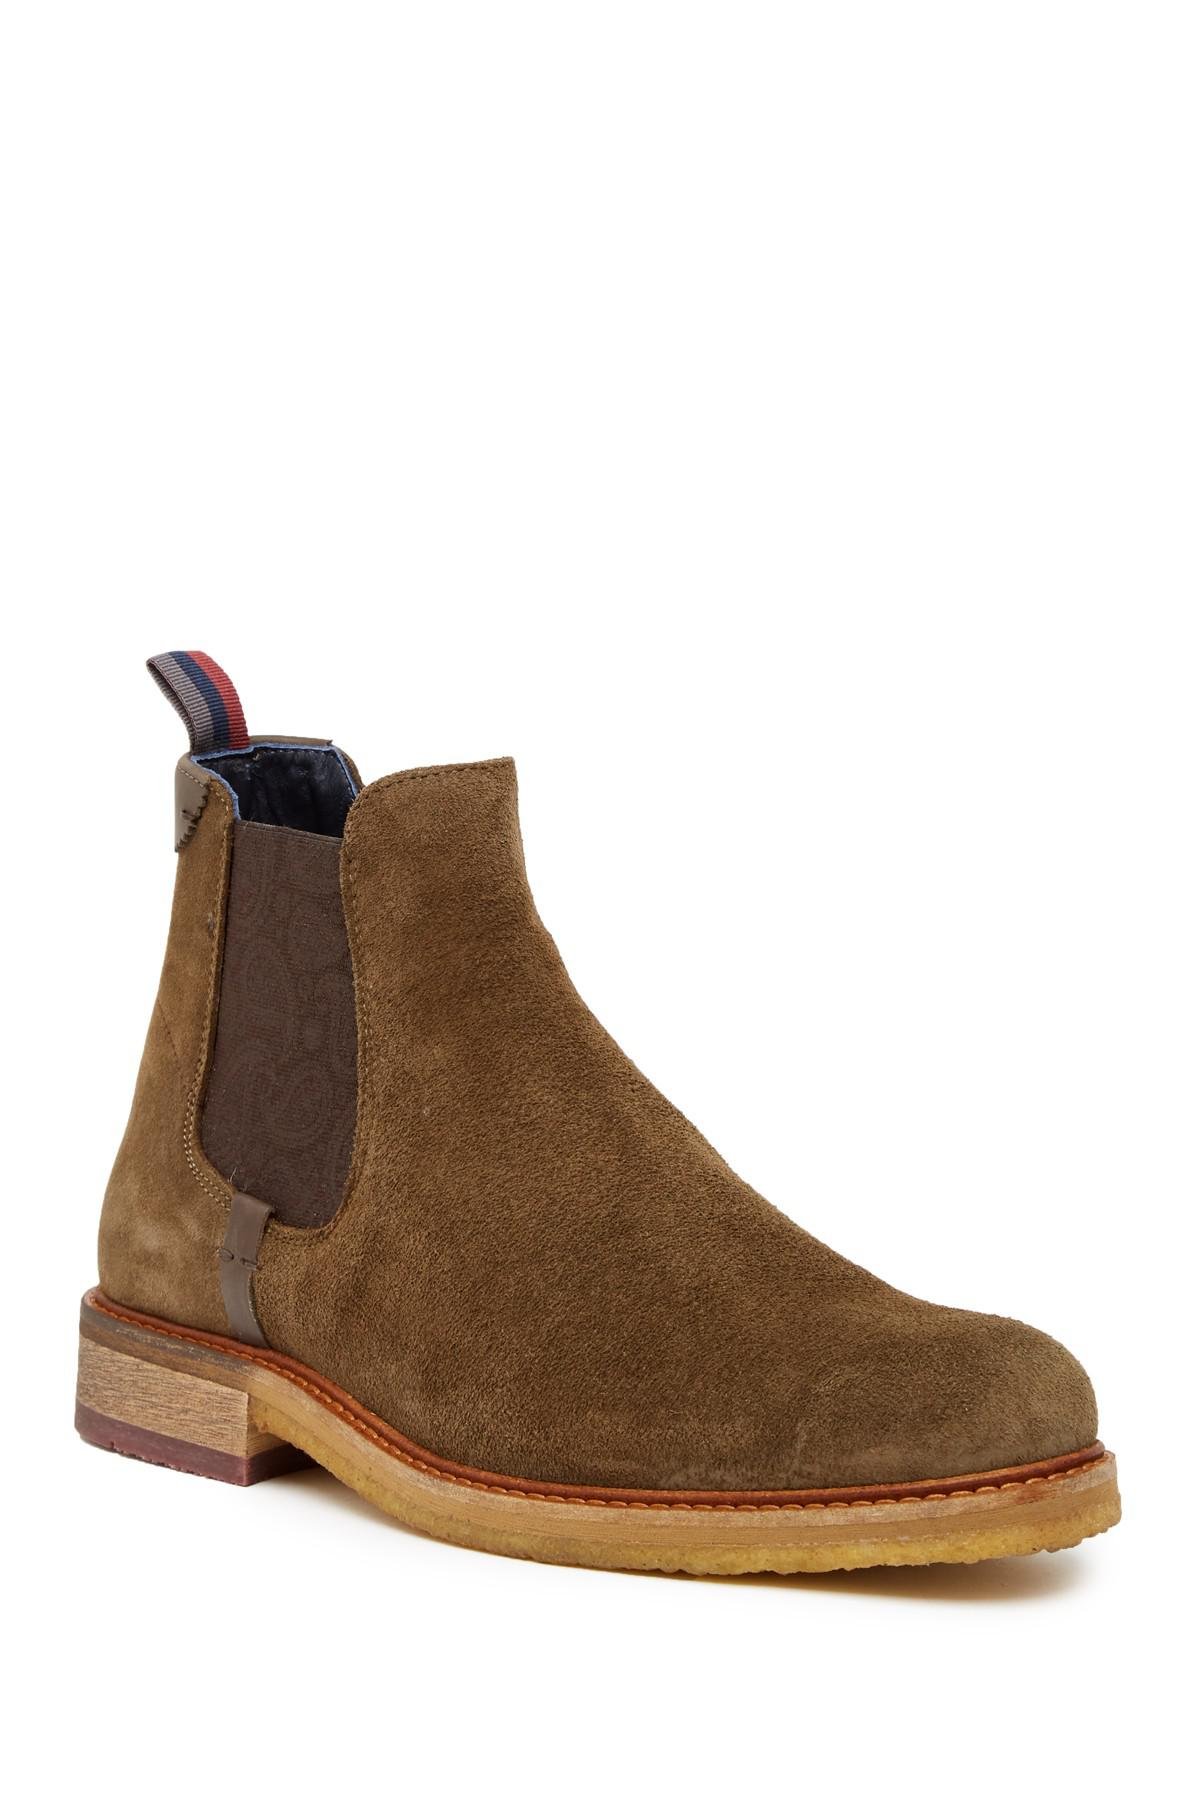 Ted Baker Suede Bronzo Chelsea Boot in Green for Men - Lyst